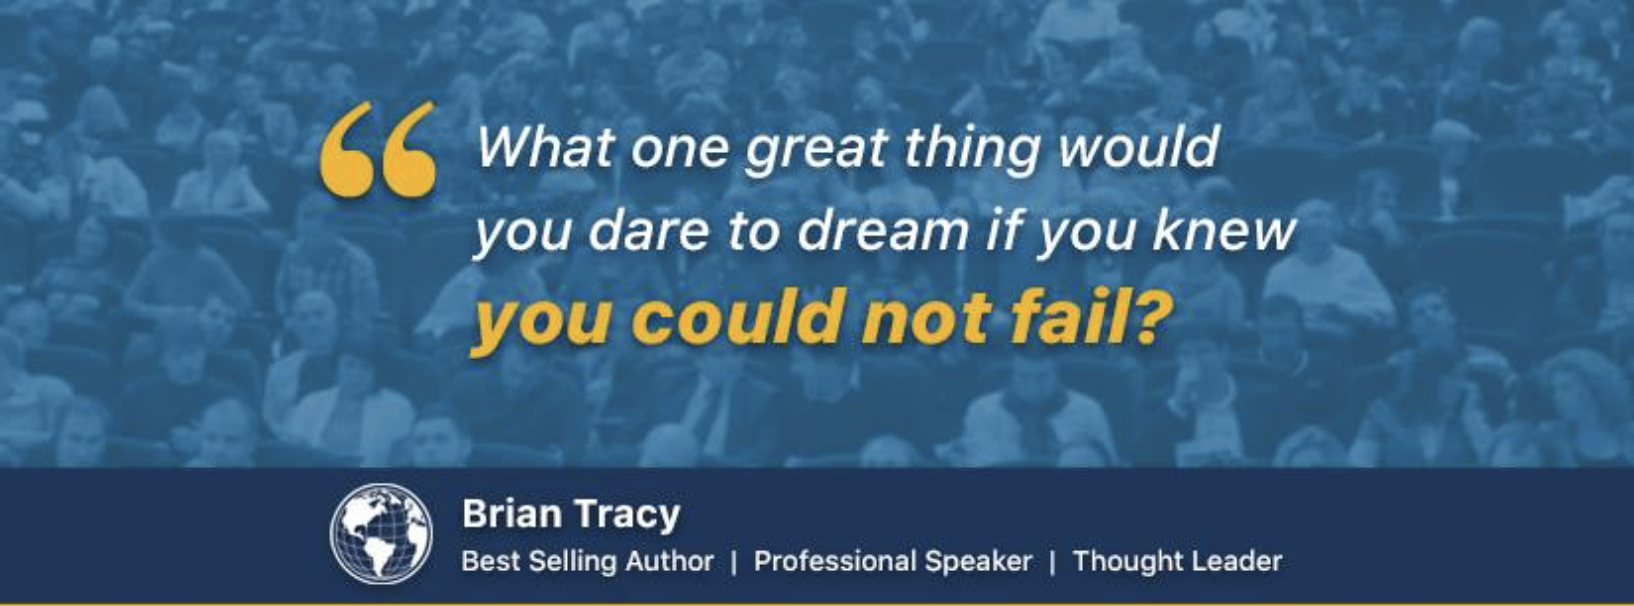 Brian Tracy Facebook Page Image